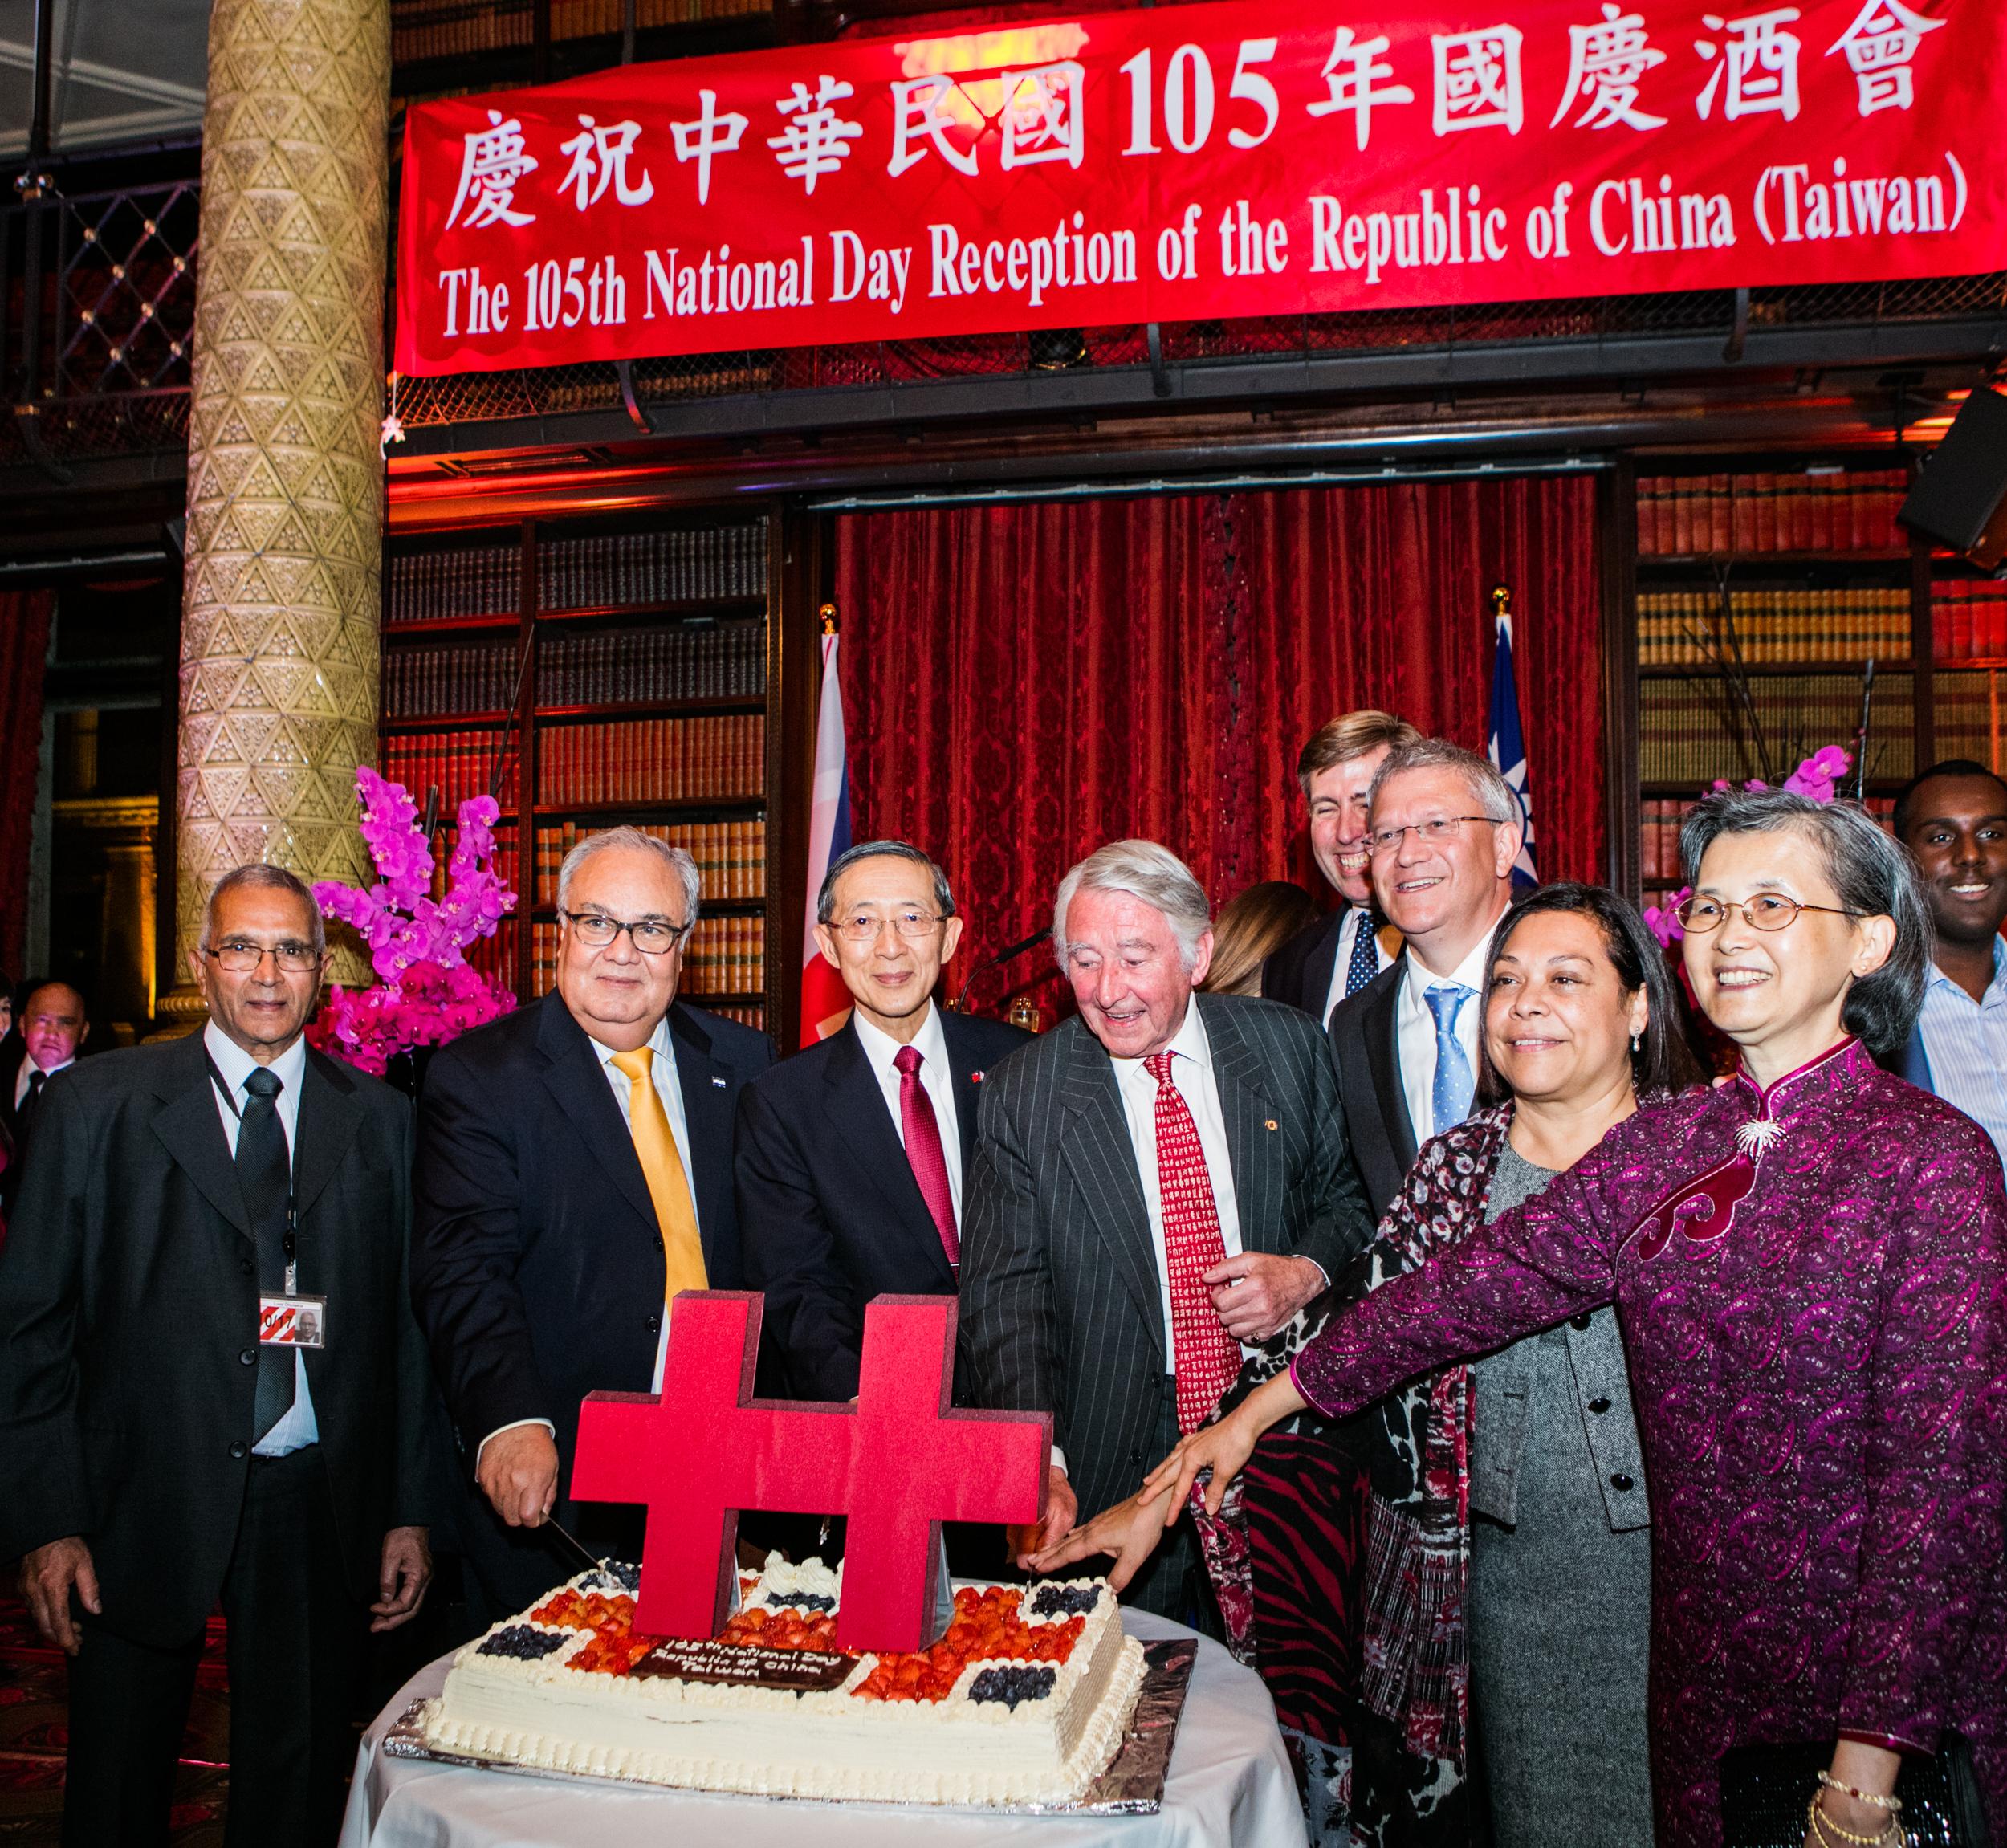 On 10th October 2016, the TRO hosted a reception for the 105th National Day of the Republic of China (Taiwan) at the Gladstone Library. The event was attended by more than 450 people, including Ambassadors/High Commissioners, parliamentarians, academics, businessmen and overseas Taiwanese.